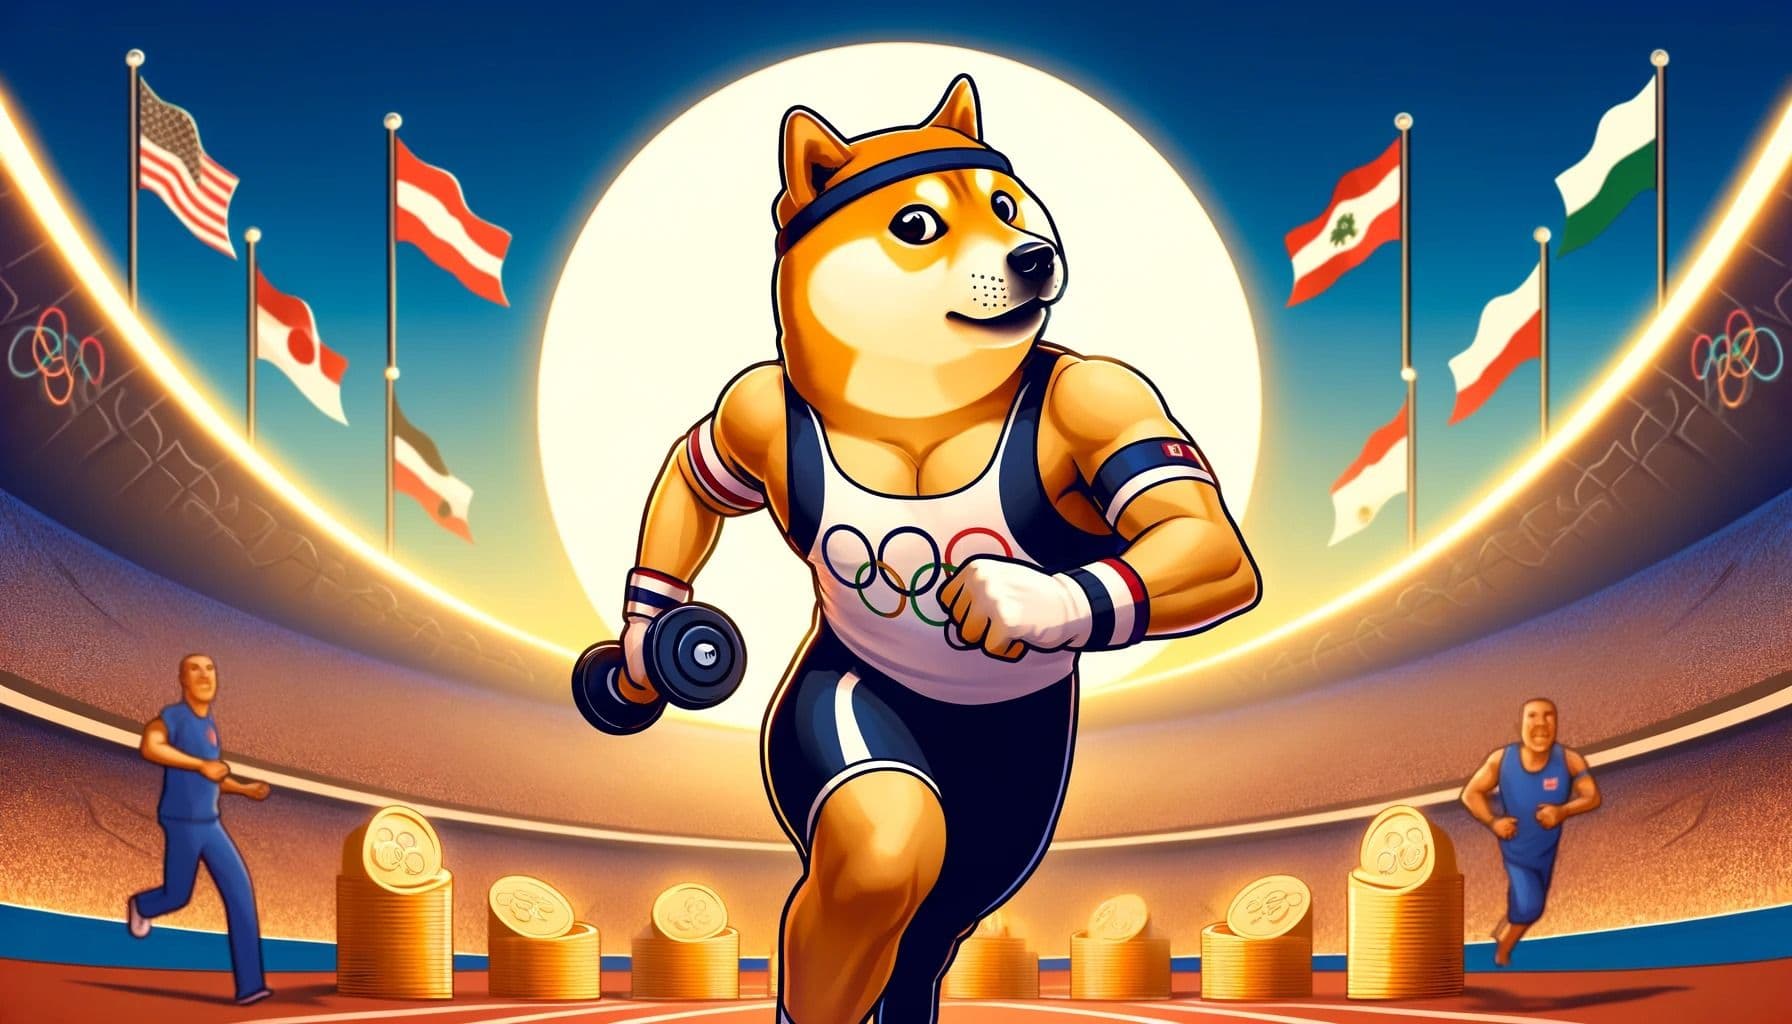 Dogecoin (DOGE) Becomes an Official Partner of Stade de France for the 2024 Olympics